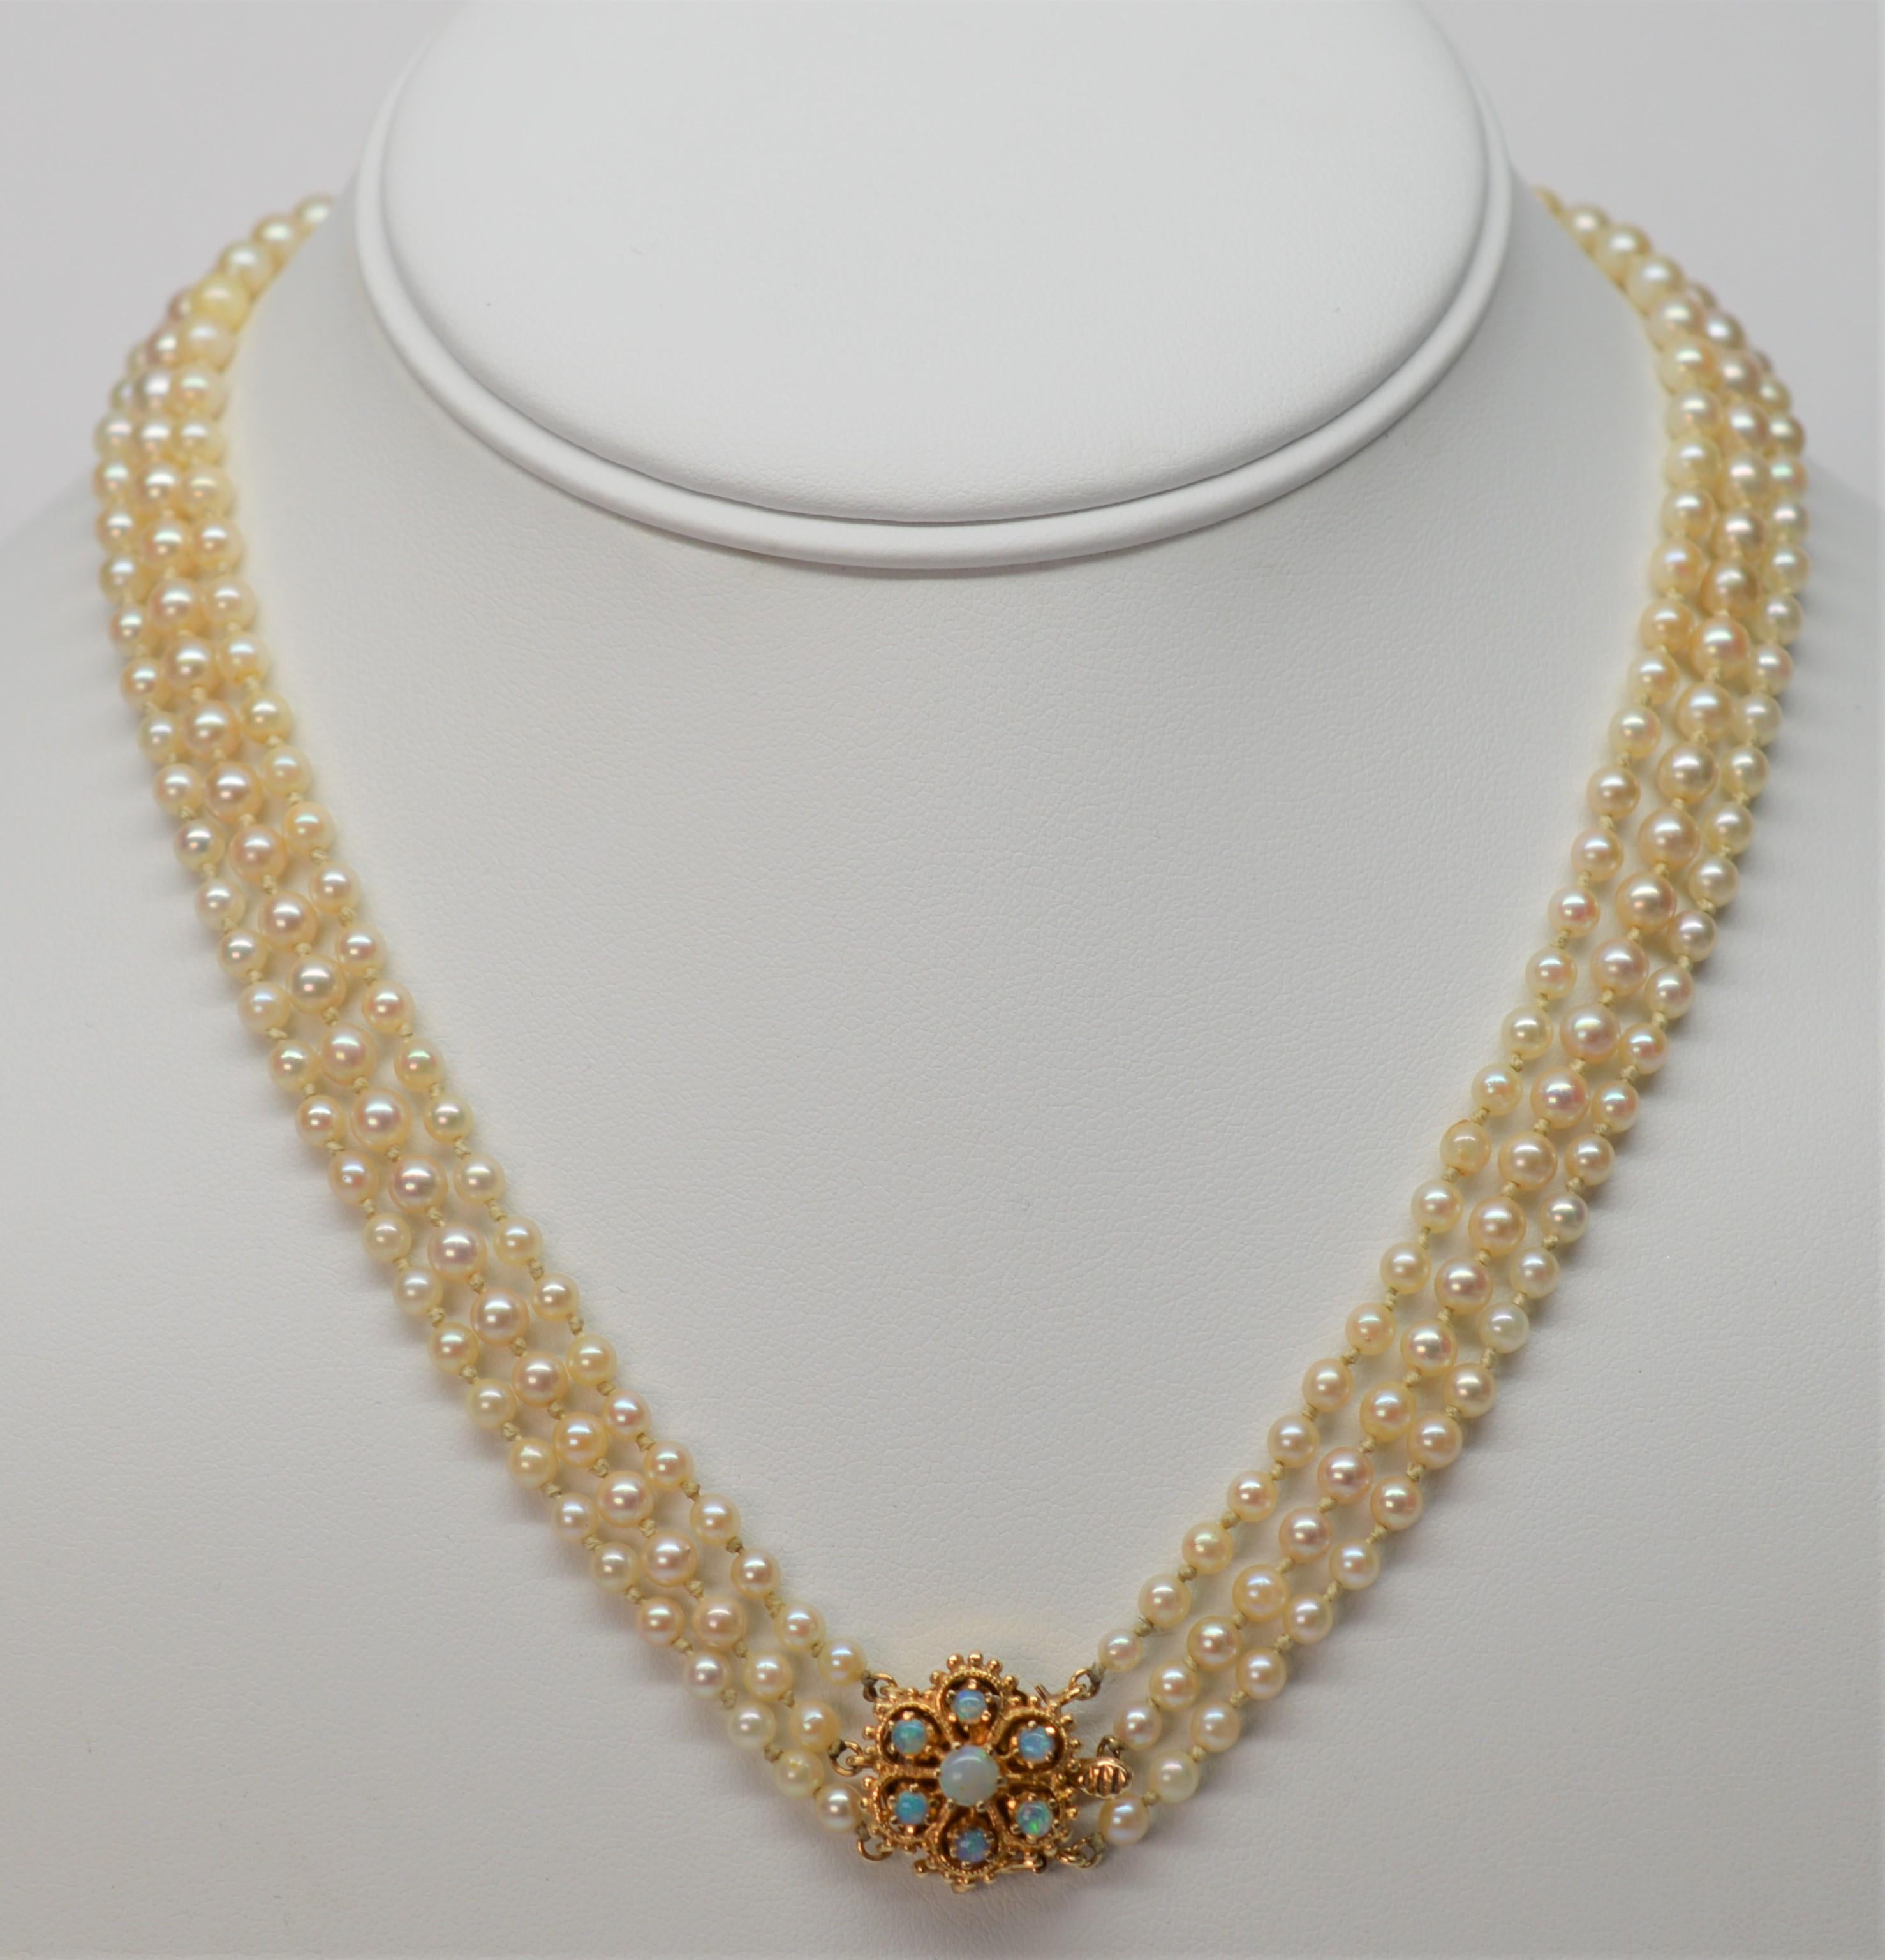 Triple Strand Akoya Pearl Necklace with 14K Yellow Gold & Opal Clasp 2